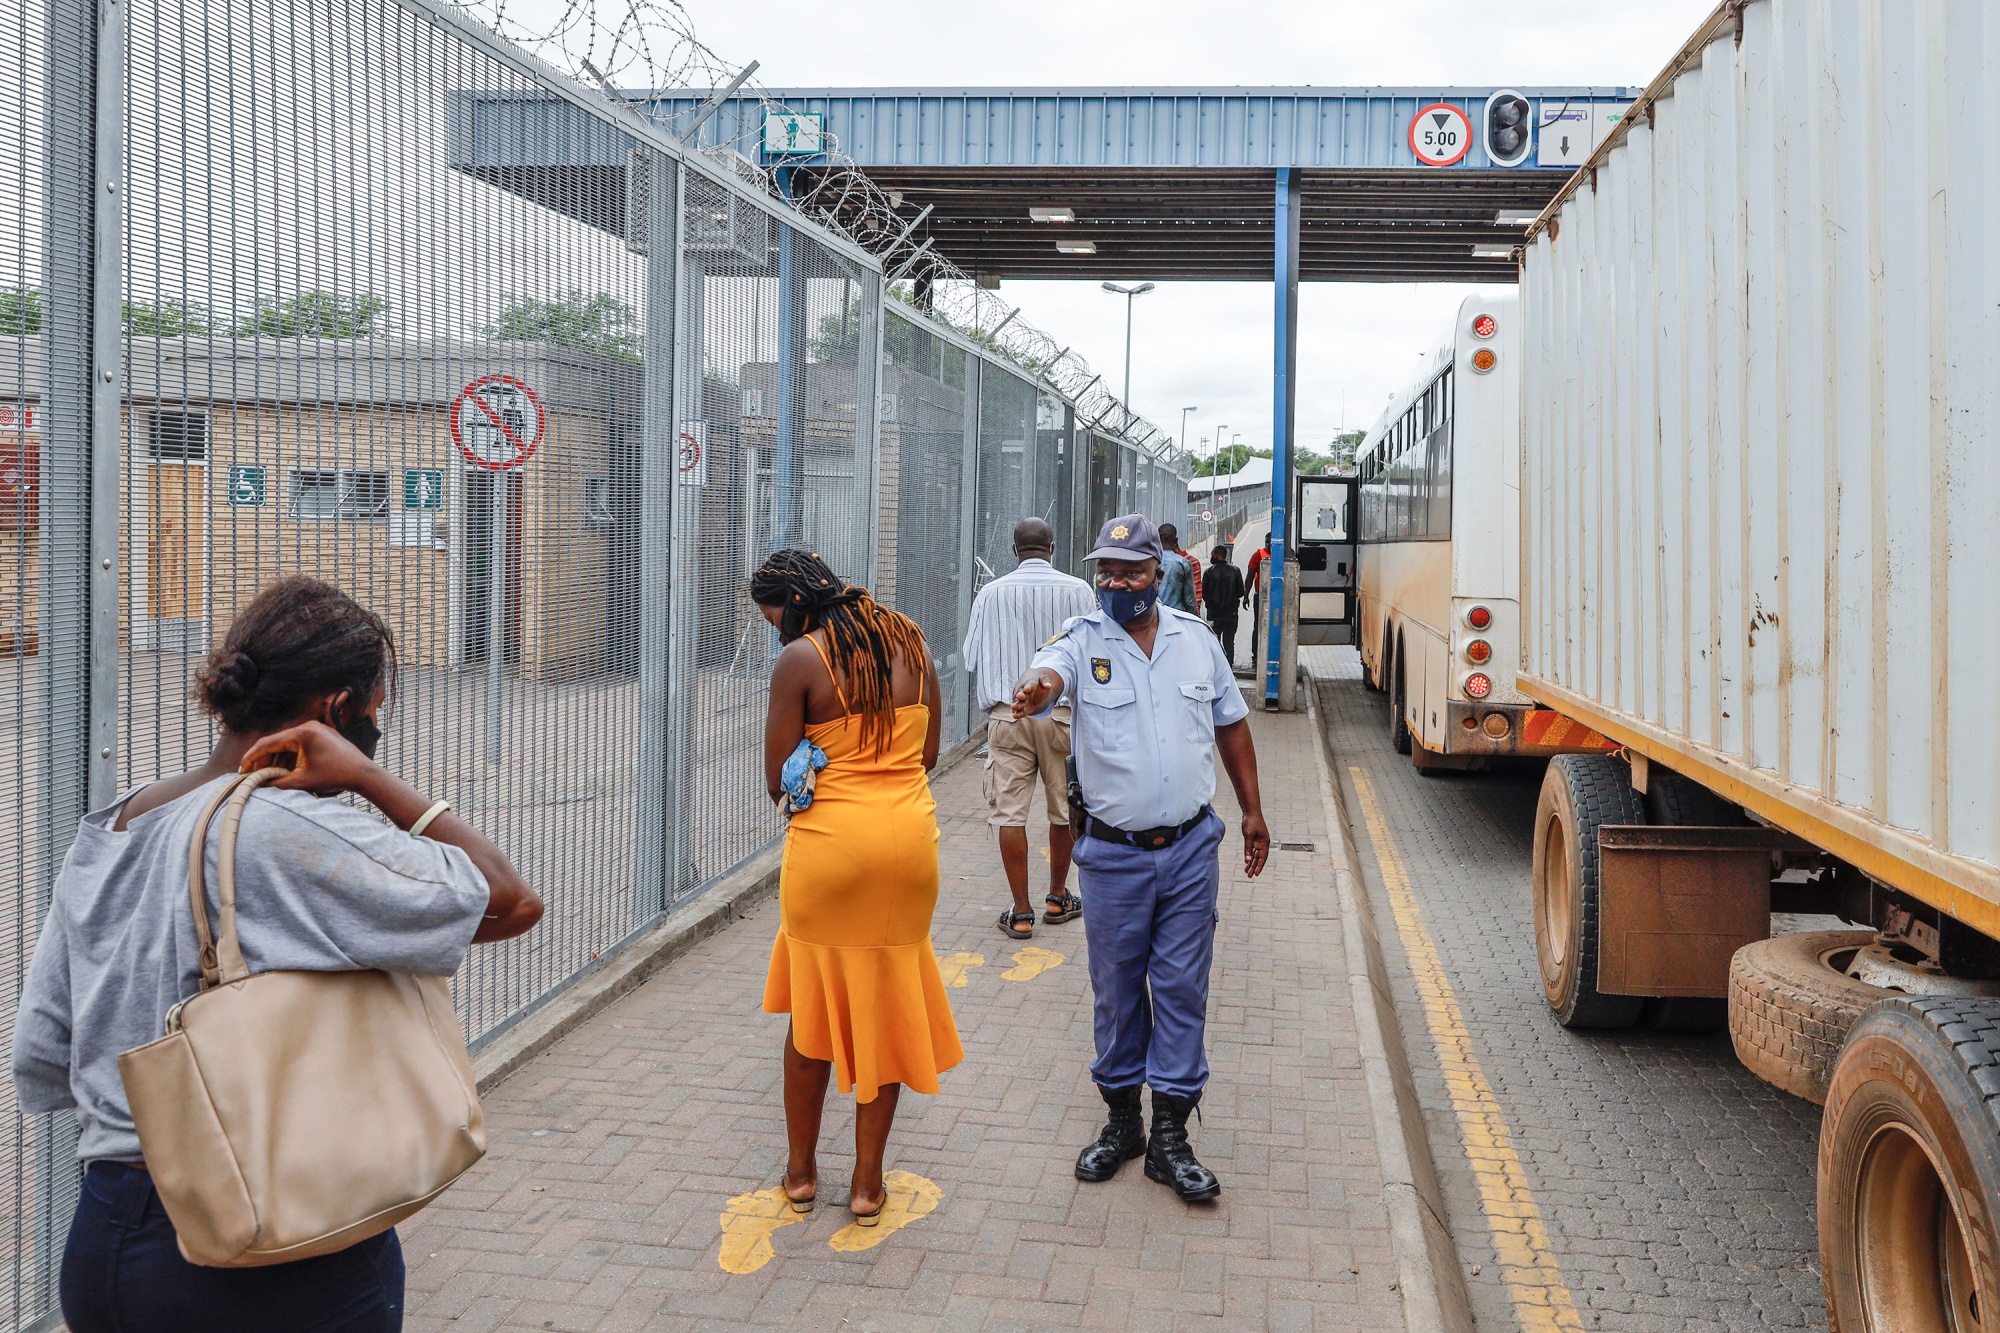 People line up at the Beitbridge border between South Africa and Zimbabwe near Musina, on Jan. 8.